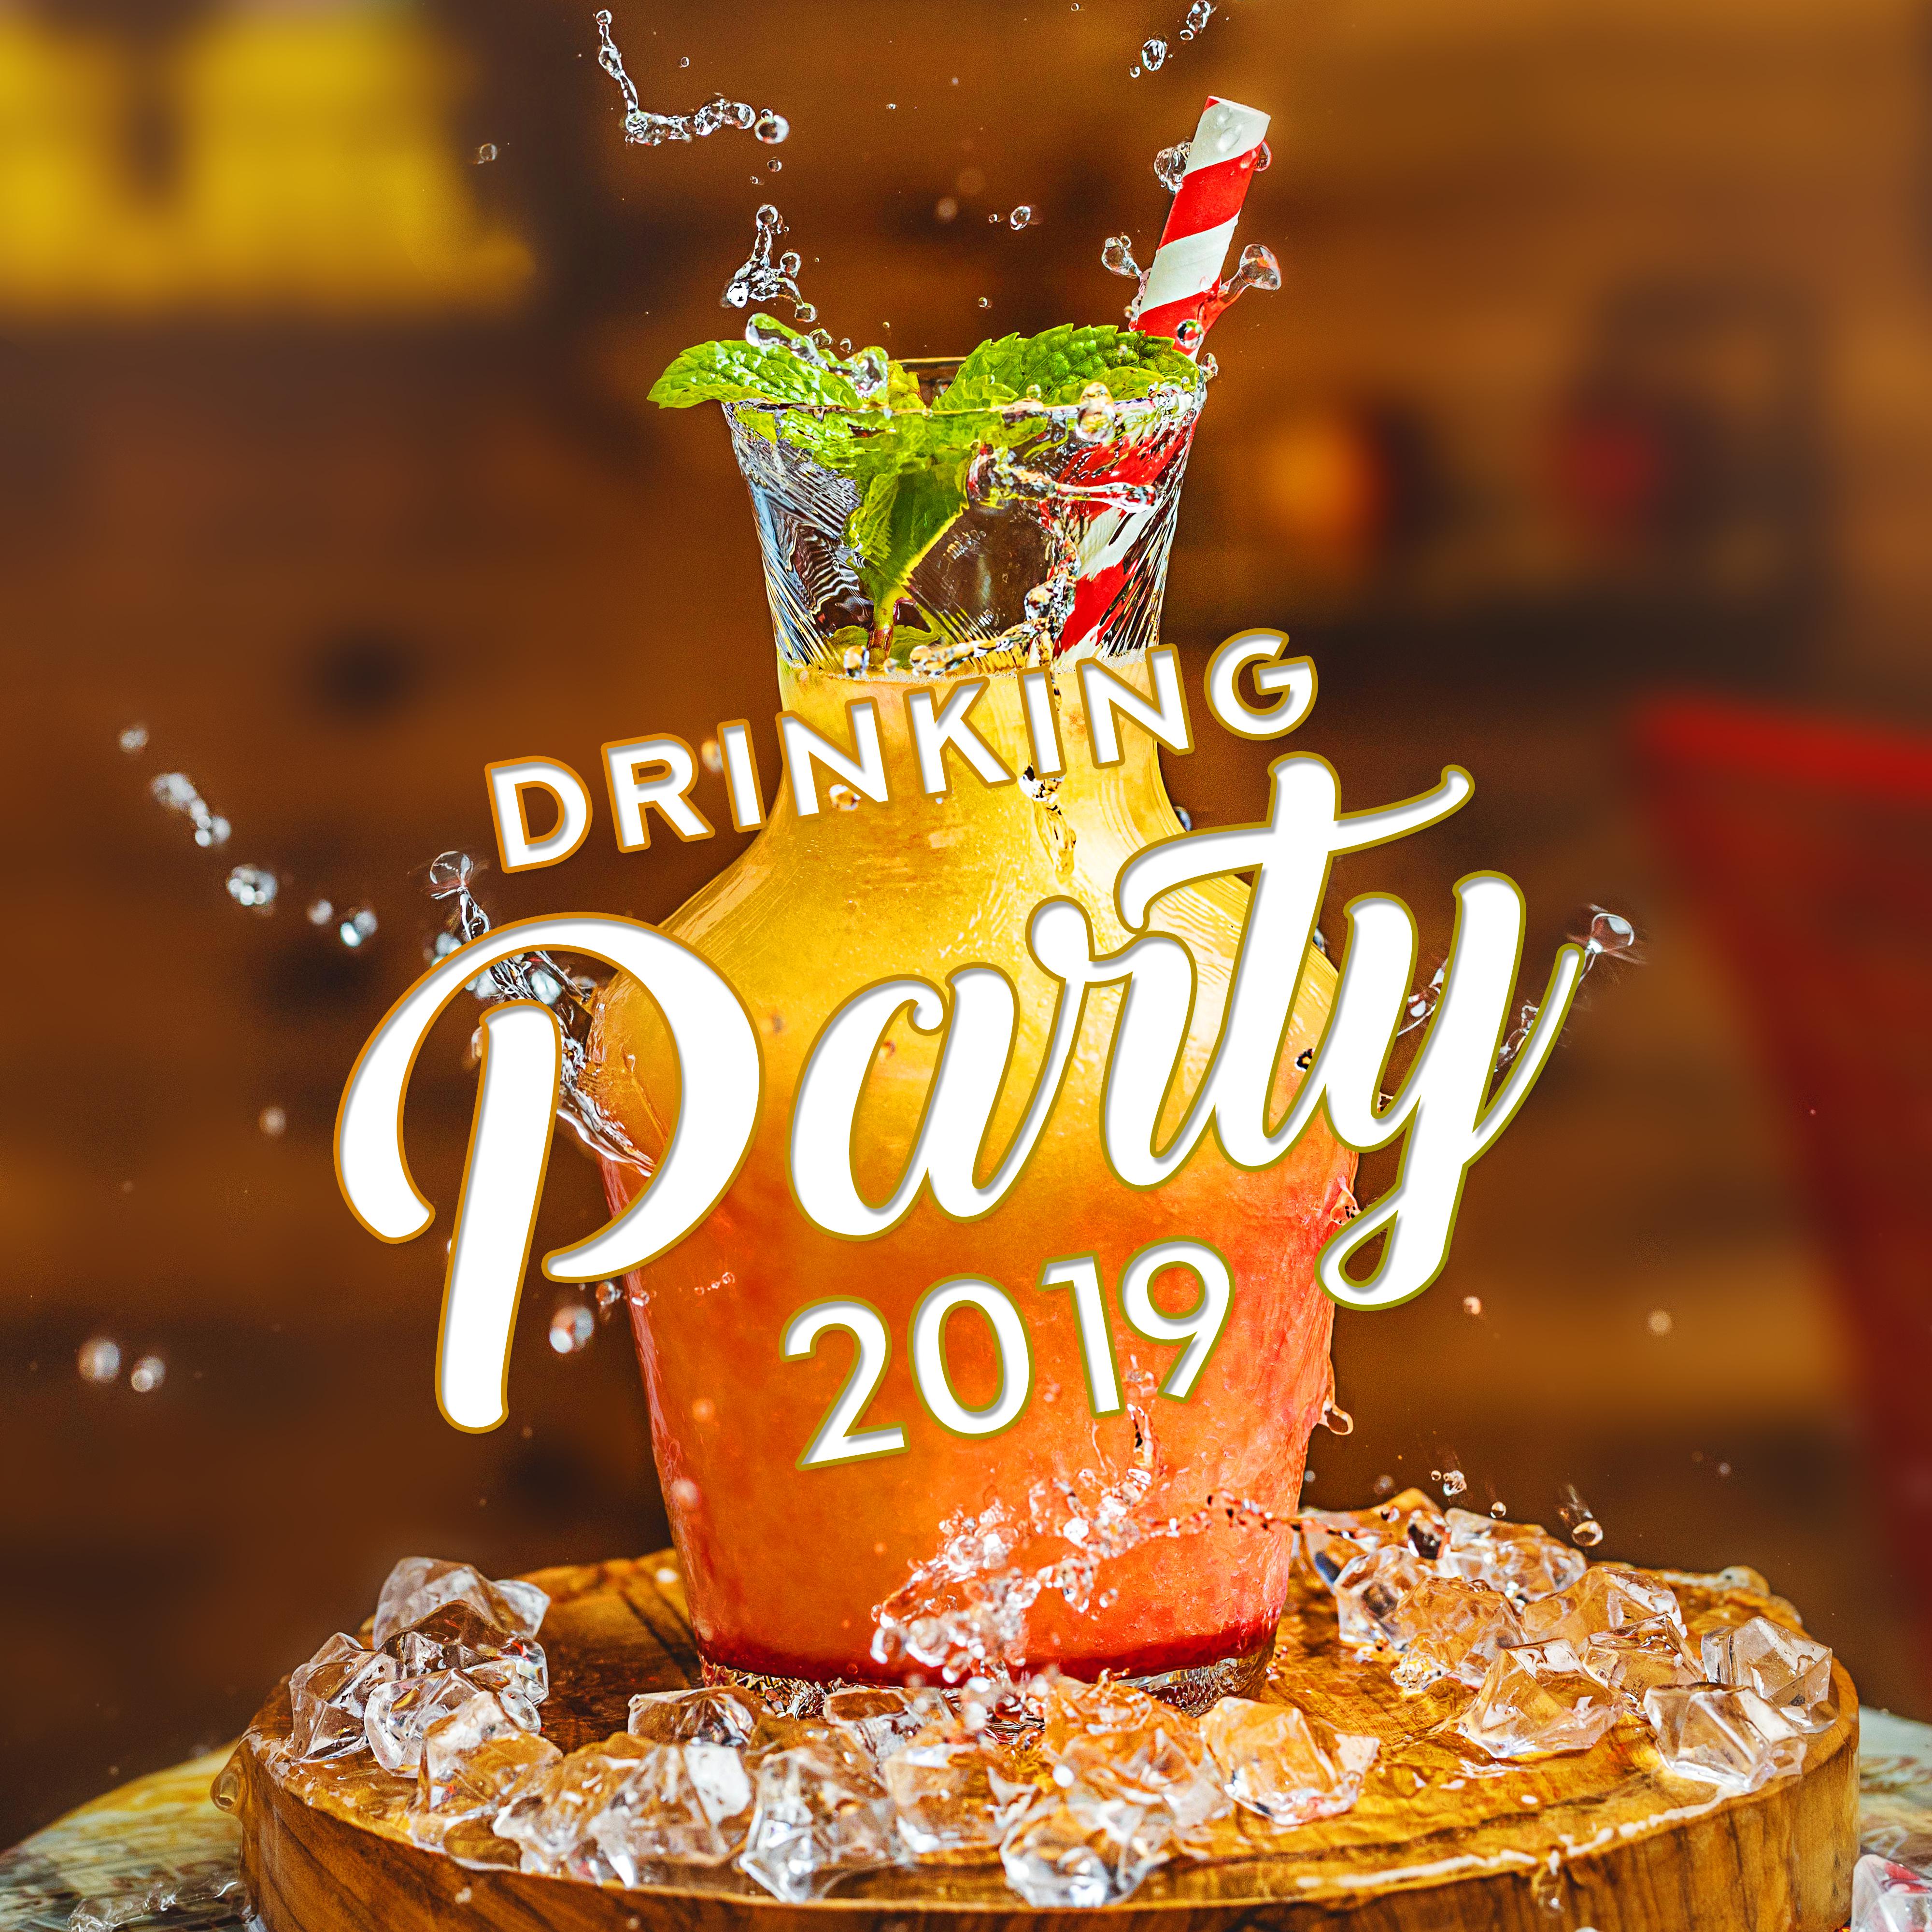 Drinking Party 2019 - Music for the Party Chillout Zone